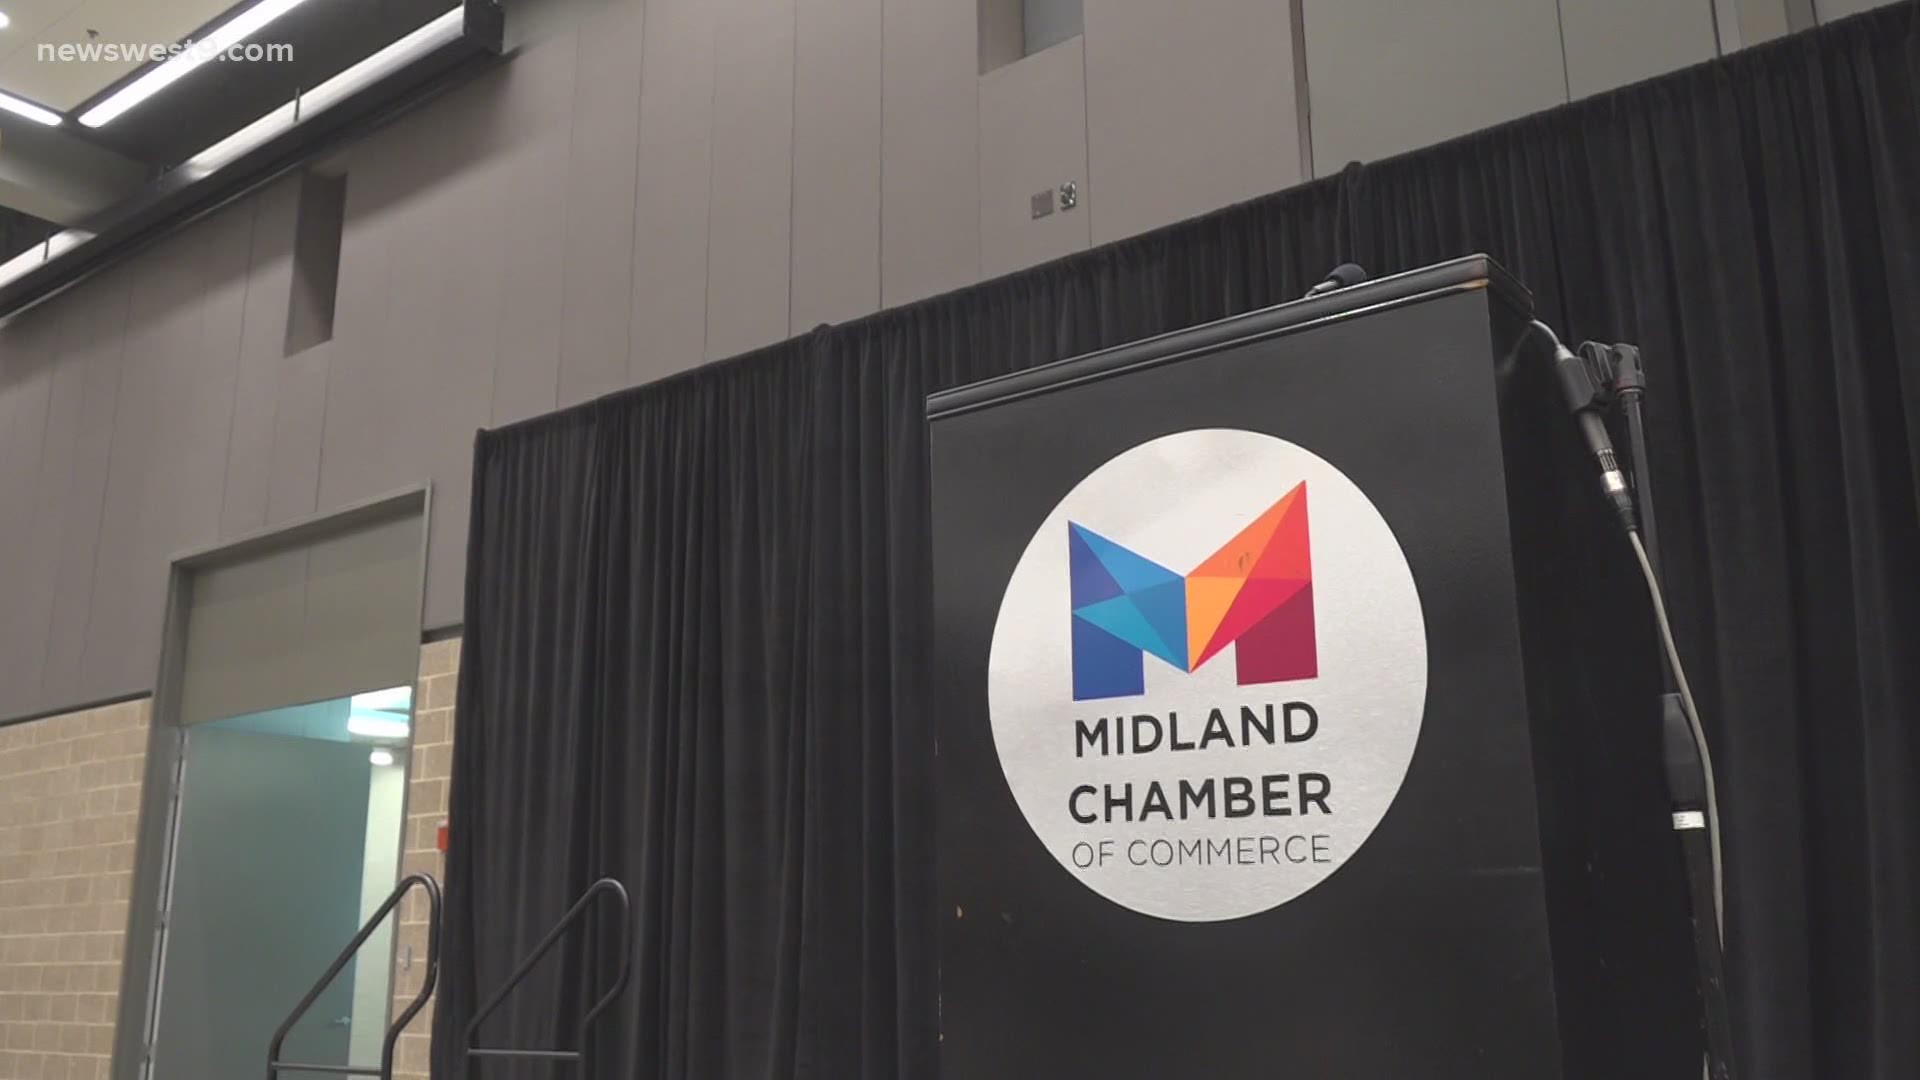 The Midland Chamber Foundation along with HEB has teamed up to help fund the classroom needs of students.